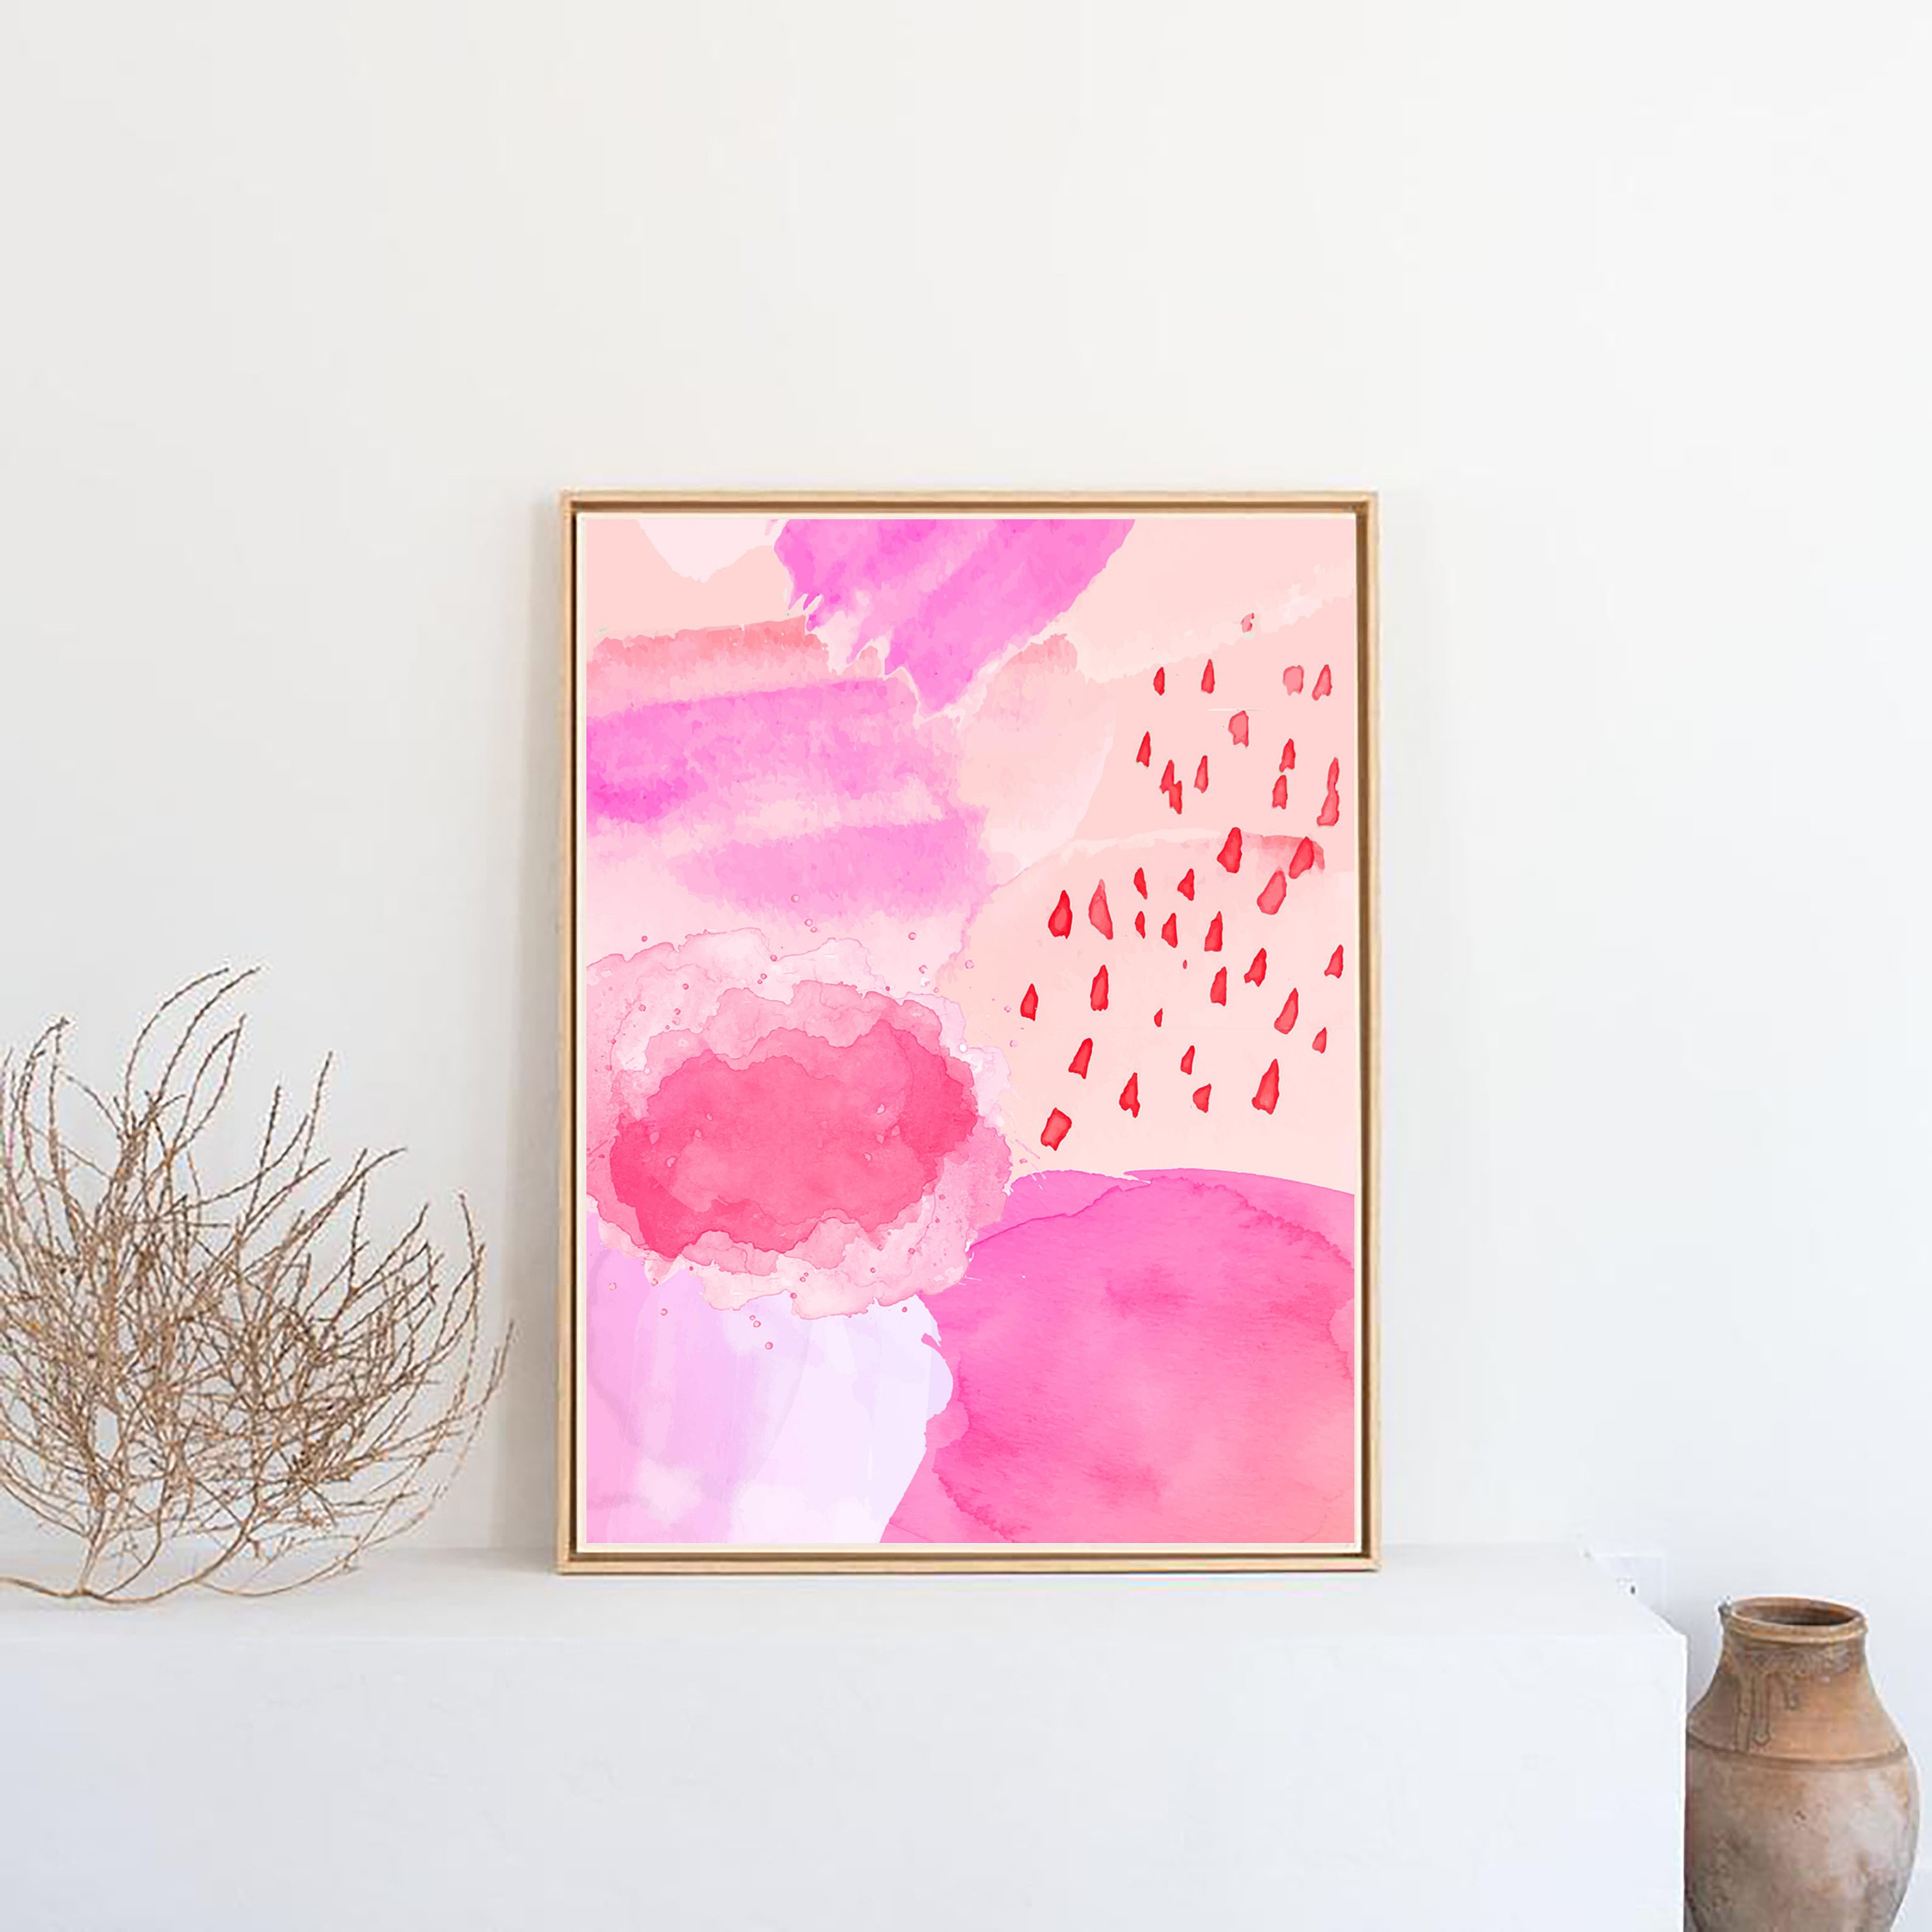  Pink Fashion Canvas Wall Art Perfume Artwork Pink Shoes  Watercolor Painting on bag painting for woman's room art print of watercolor  painting : Handmade Products